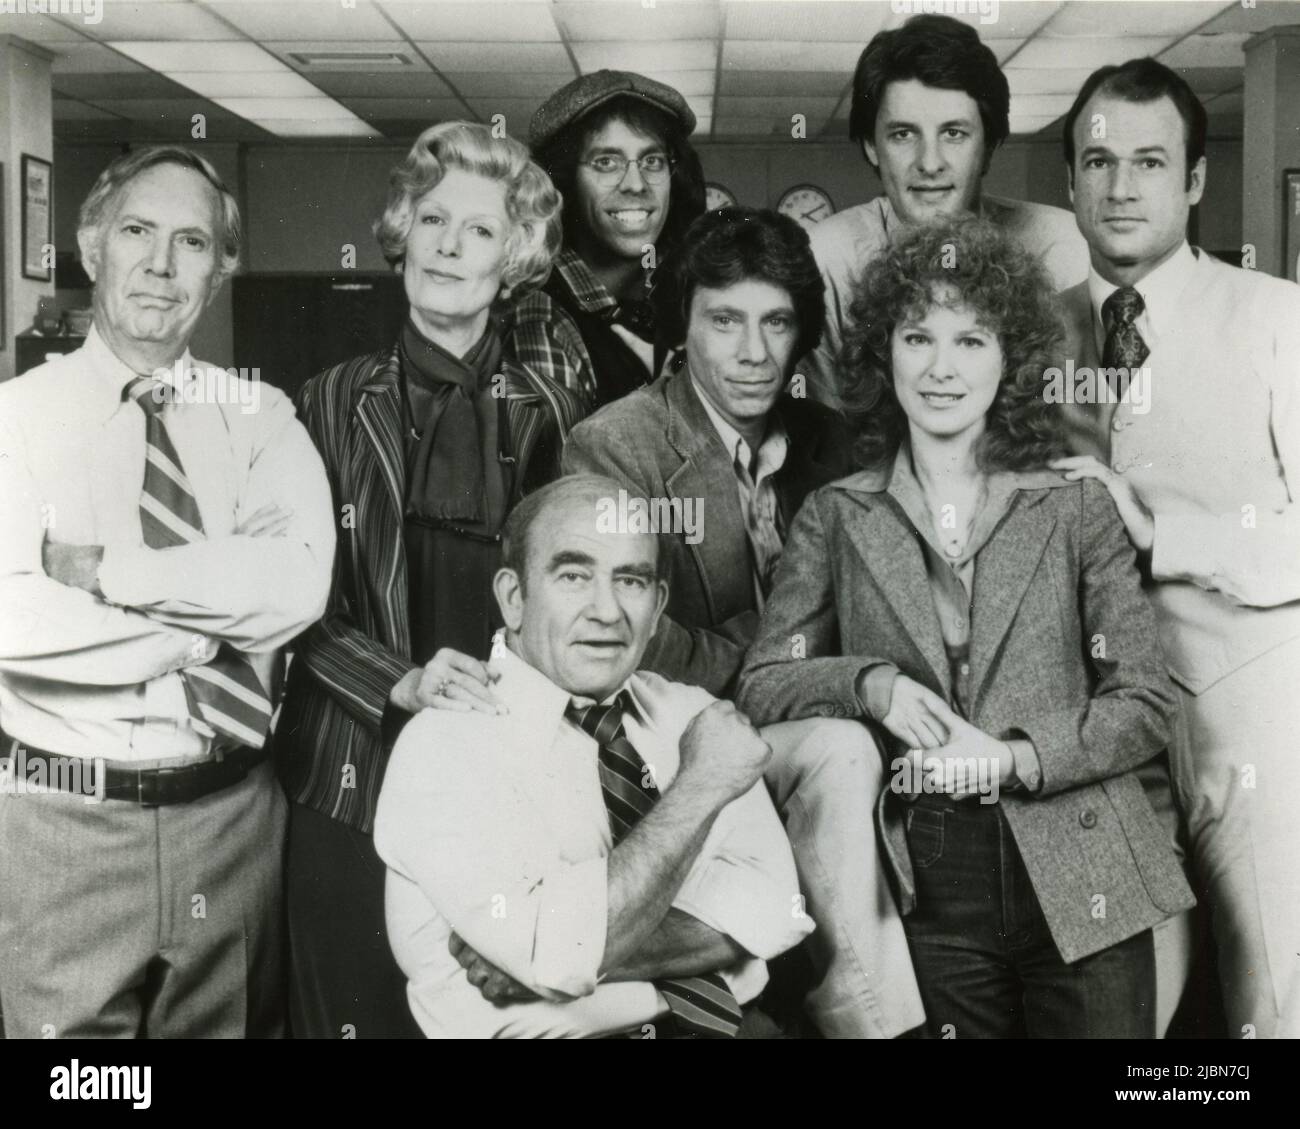 Actors Edward Asner, Mason Adams, Nancy Marchand, Daryl Anderson, Robert Walden, Allen Williams, Linda Kelsey, and Jack Bannon in the American TV Series Lou Grant, USA 1977 Stock Photo